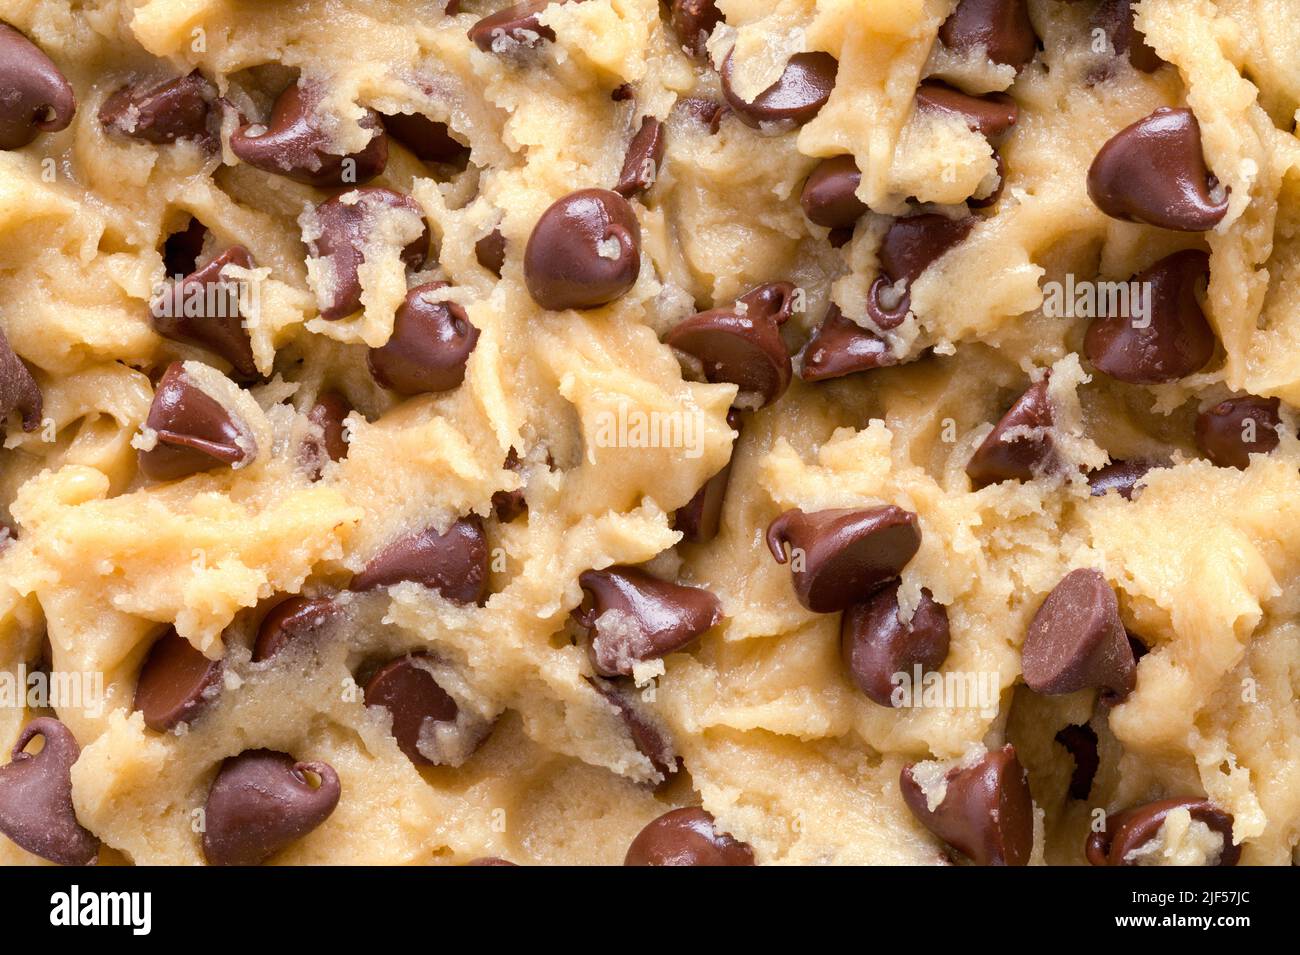 Chocolate Chip Cookie Dough Background Close Up. Stock Photo